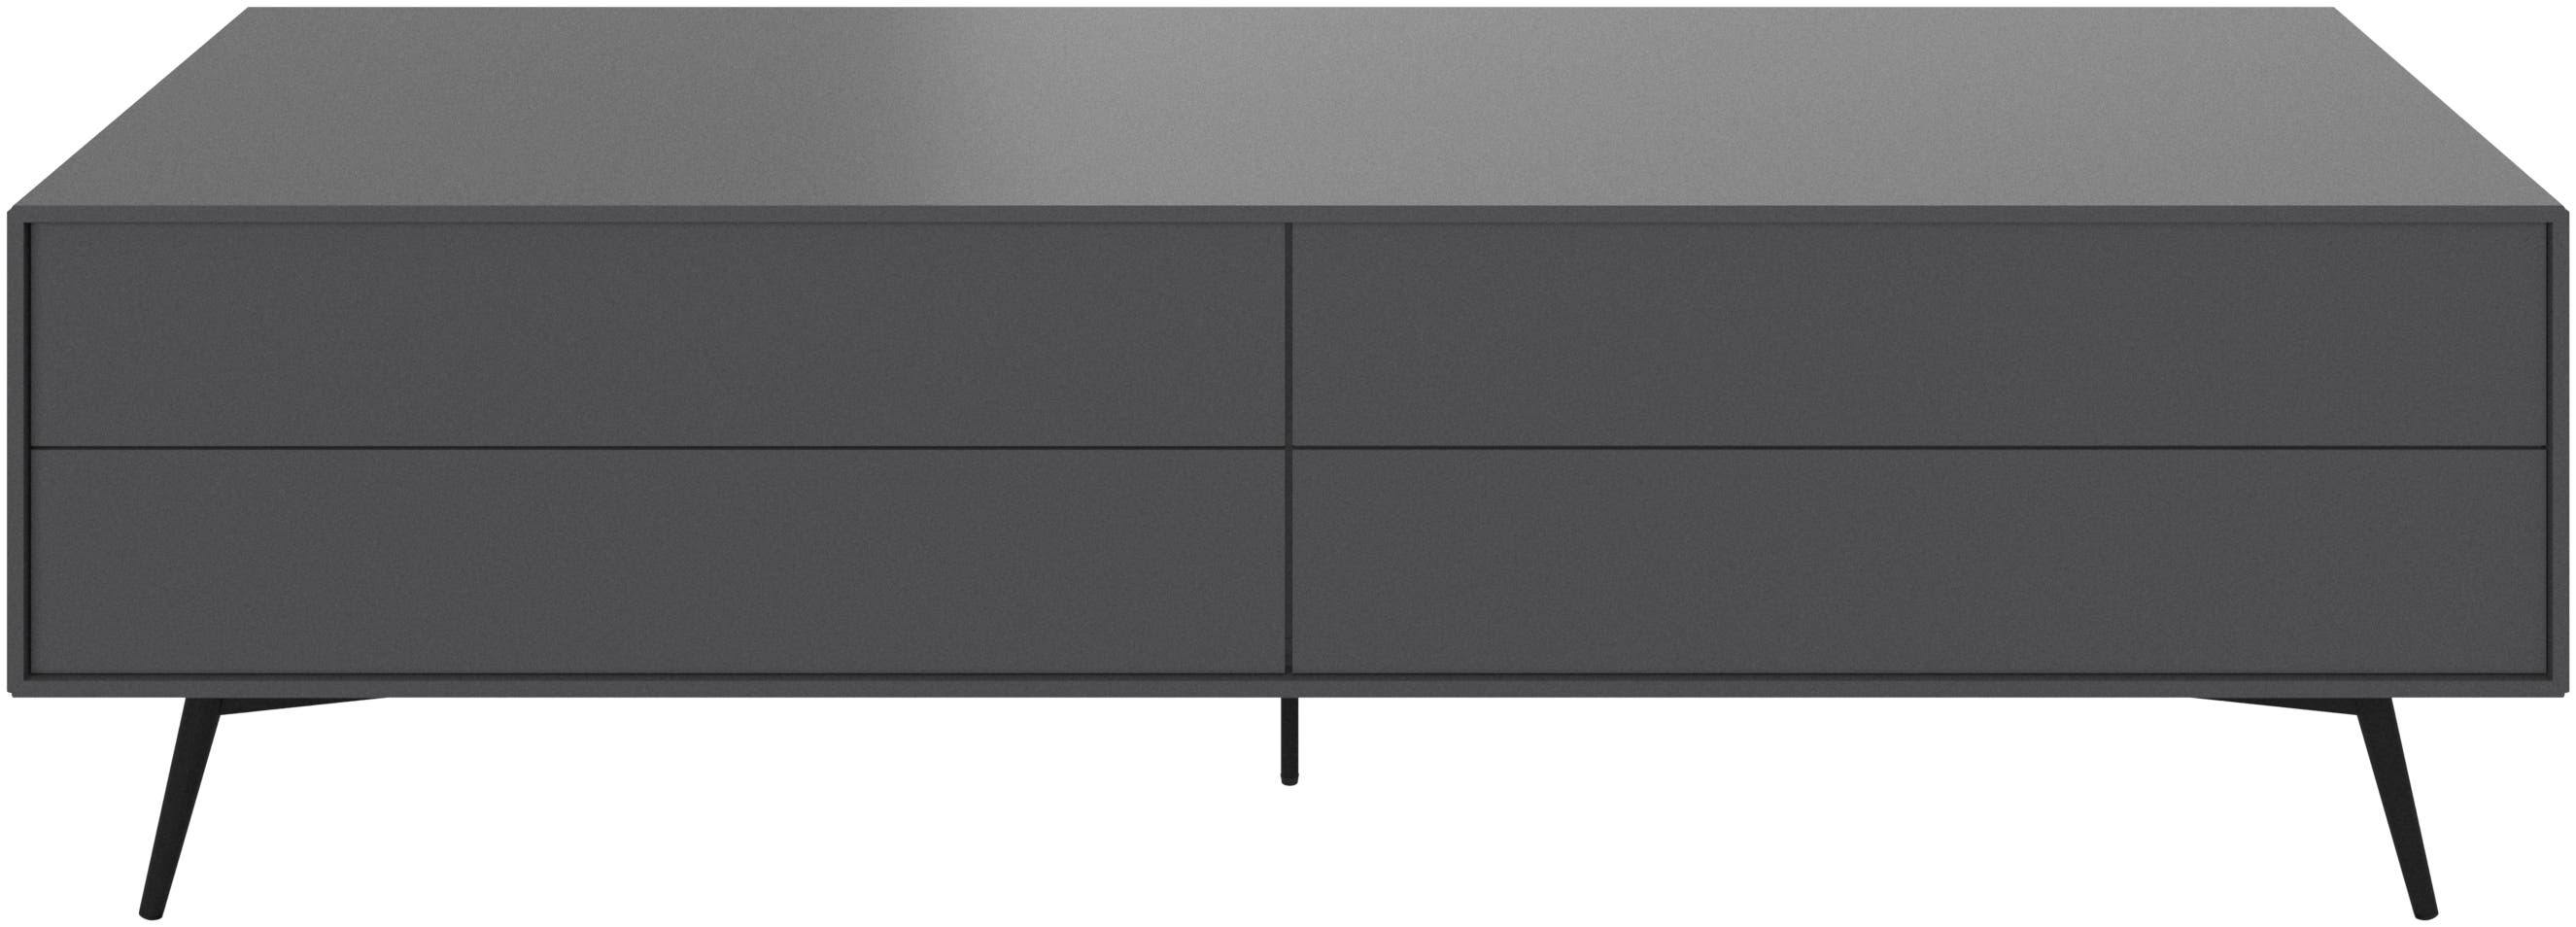 Fermo media unit with drop-down door and drawer